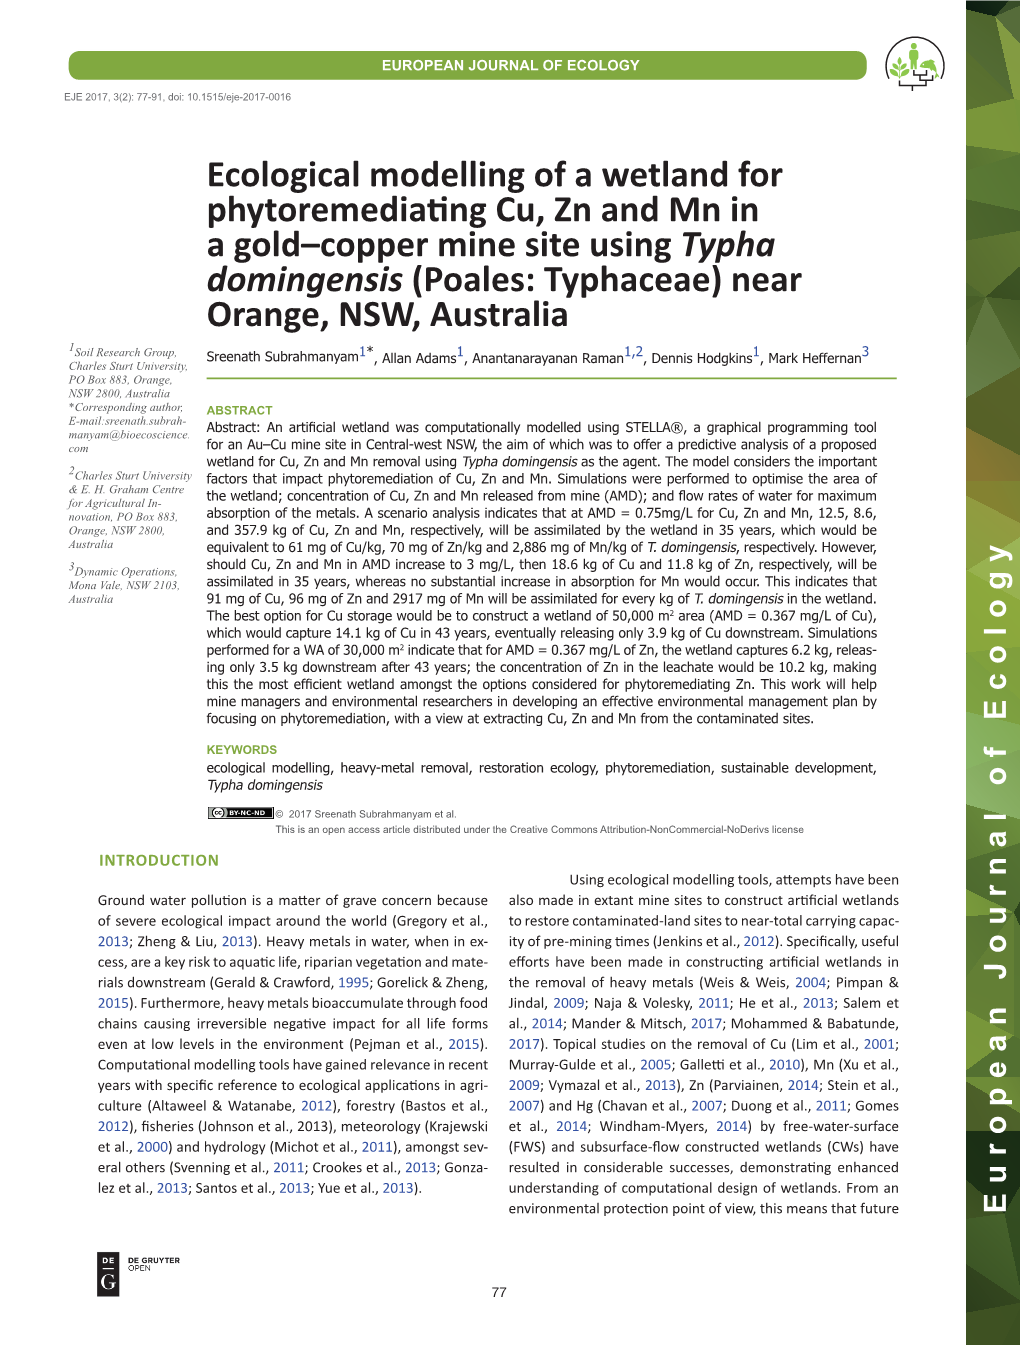 Ecological Modelling of a Wetland for Phytoremediating Cu, Zn and Mn In